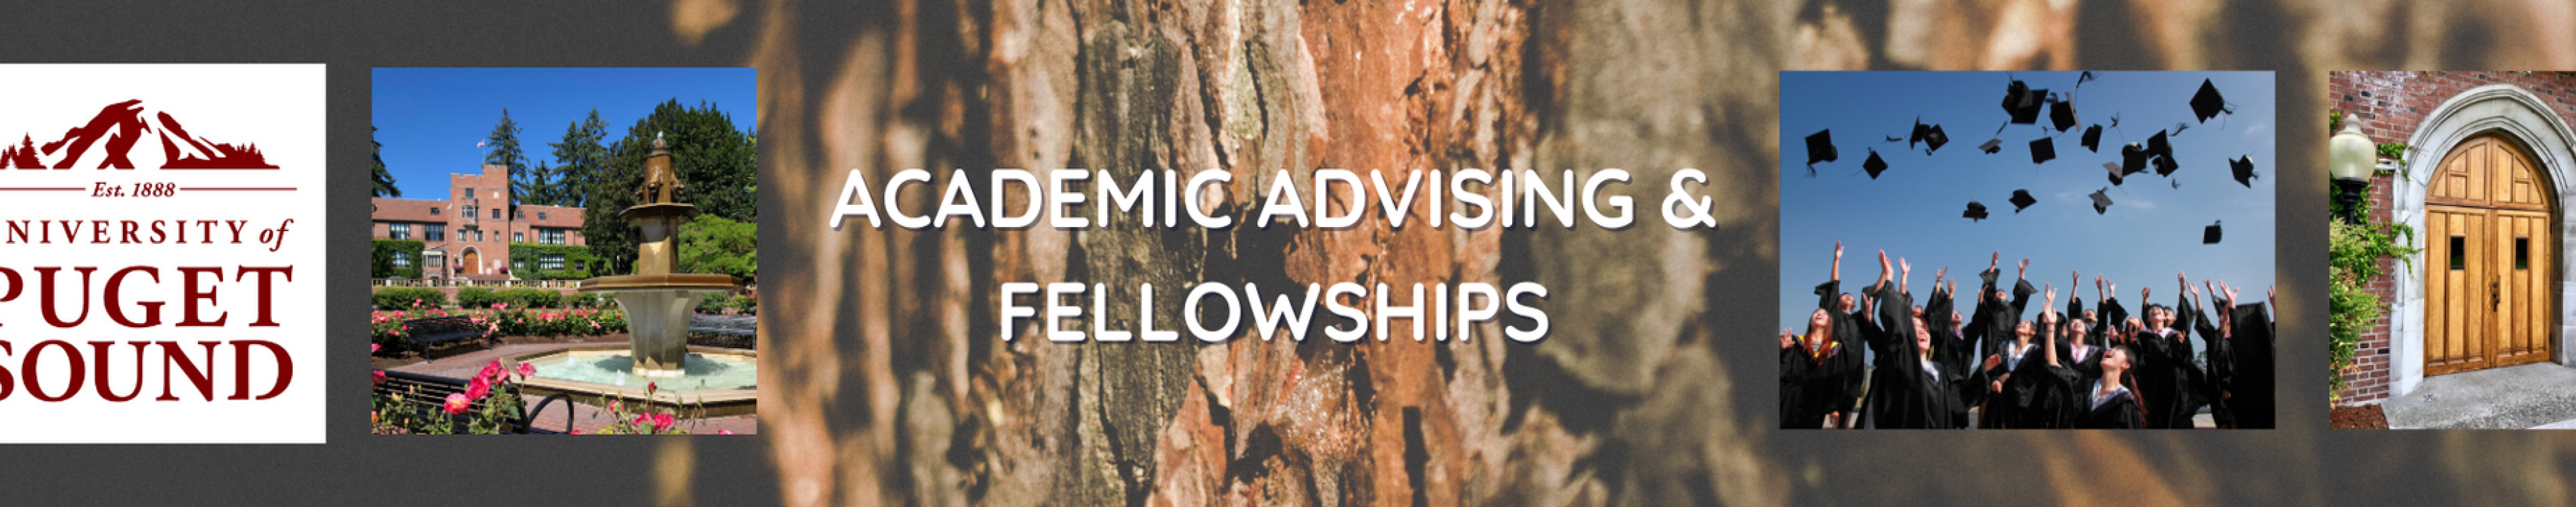 Academic Advising Banner with images